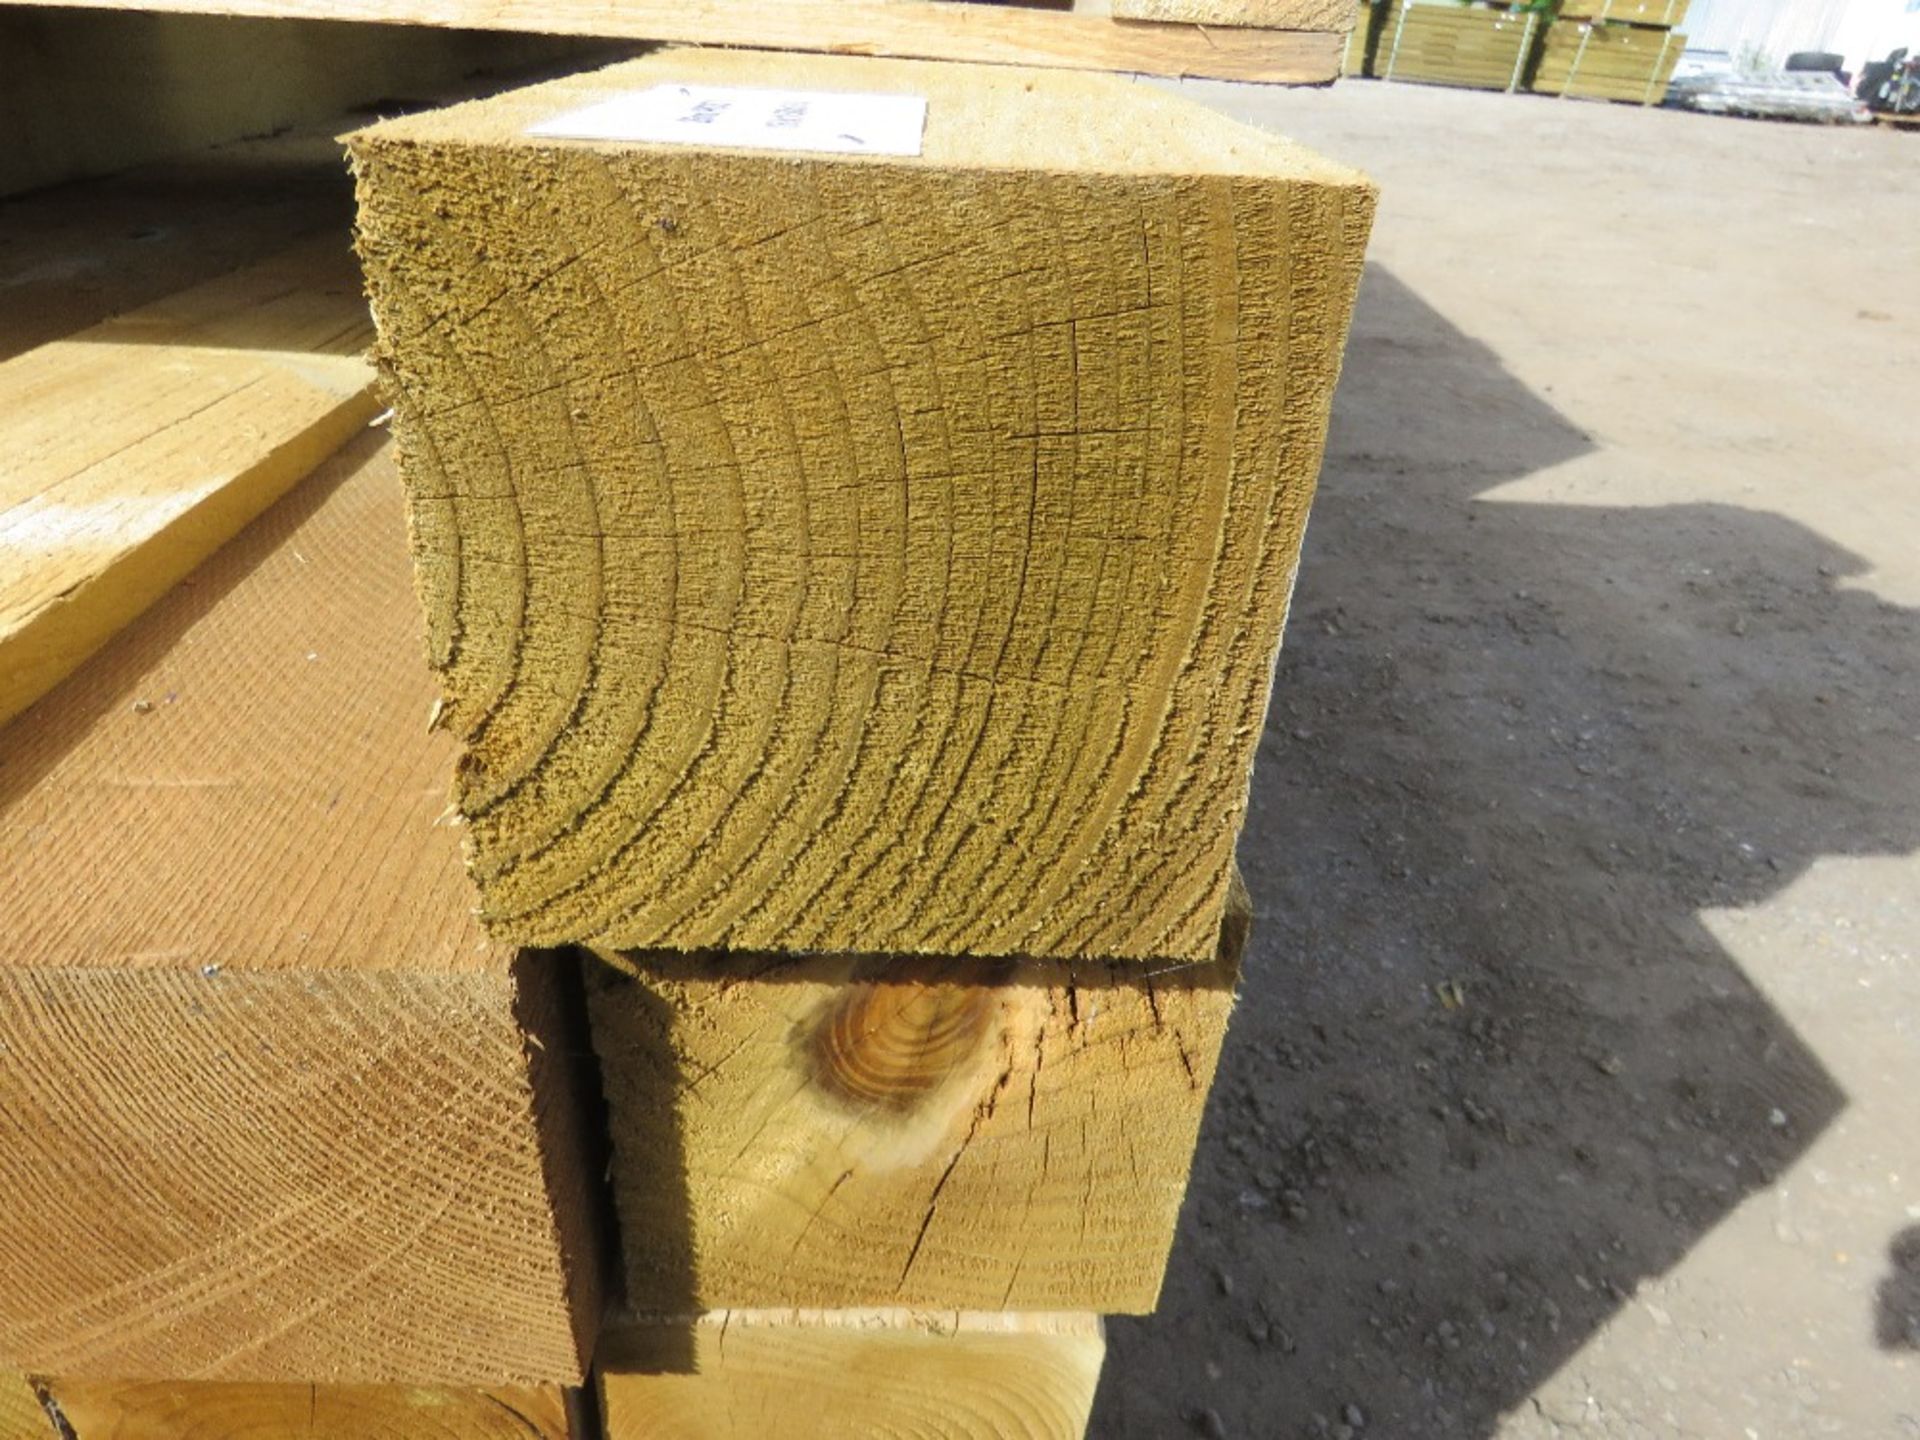 26NO LARGE TREATED TIMBER POSTS 150MMX 150MM @3600MM LENGTH APPROX. - Image 4 of 5